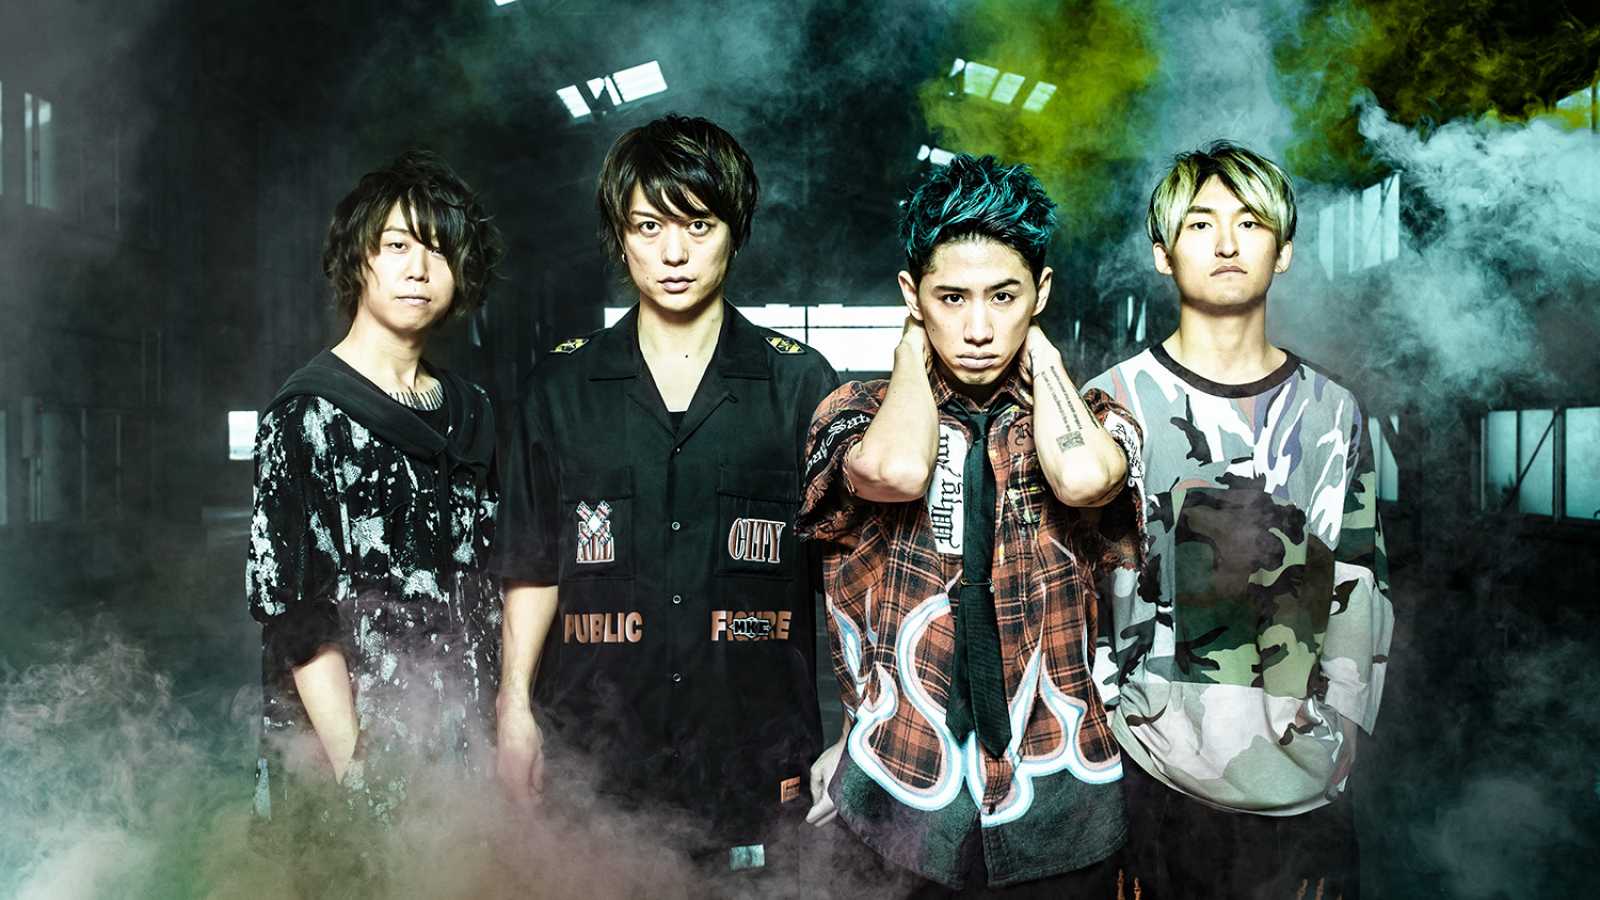 ONE OK ROCK irá transmitir shows no YouTube © AMUSE INC. All rights reserved.